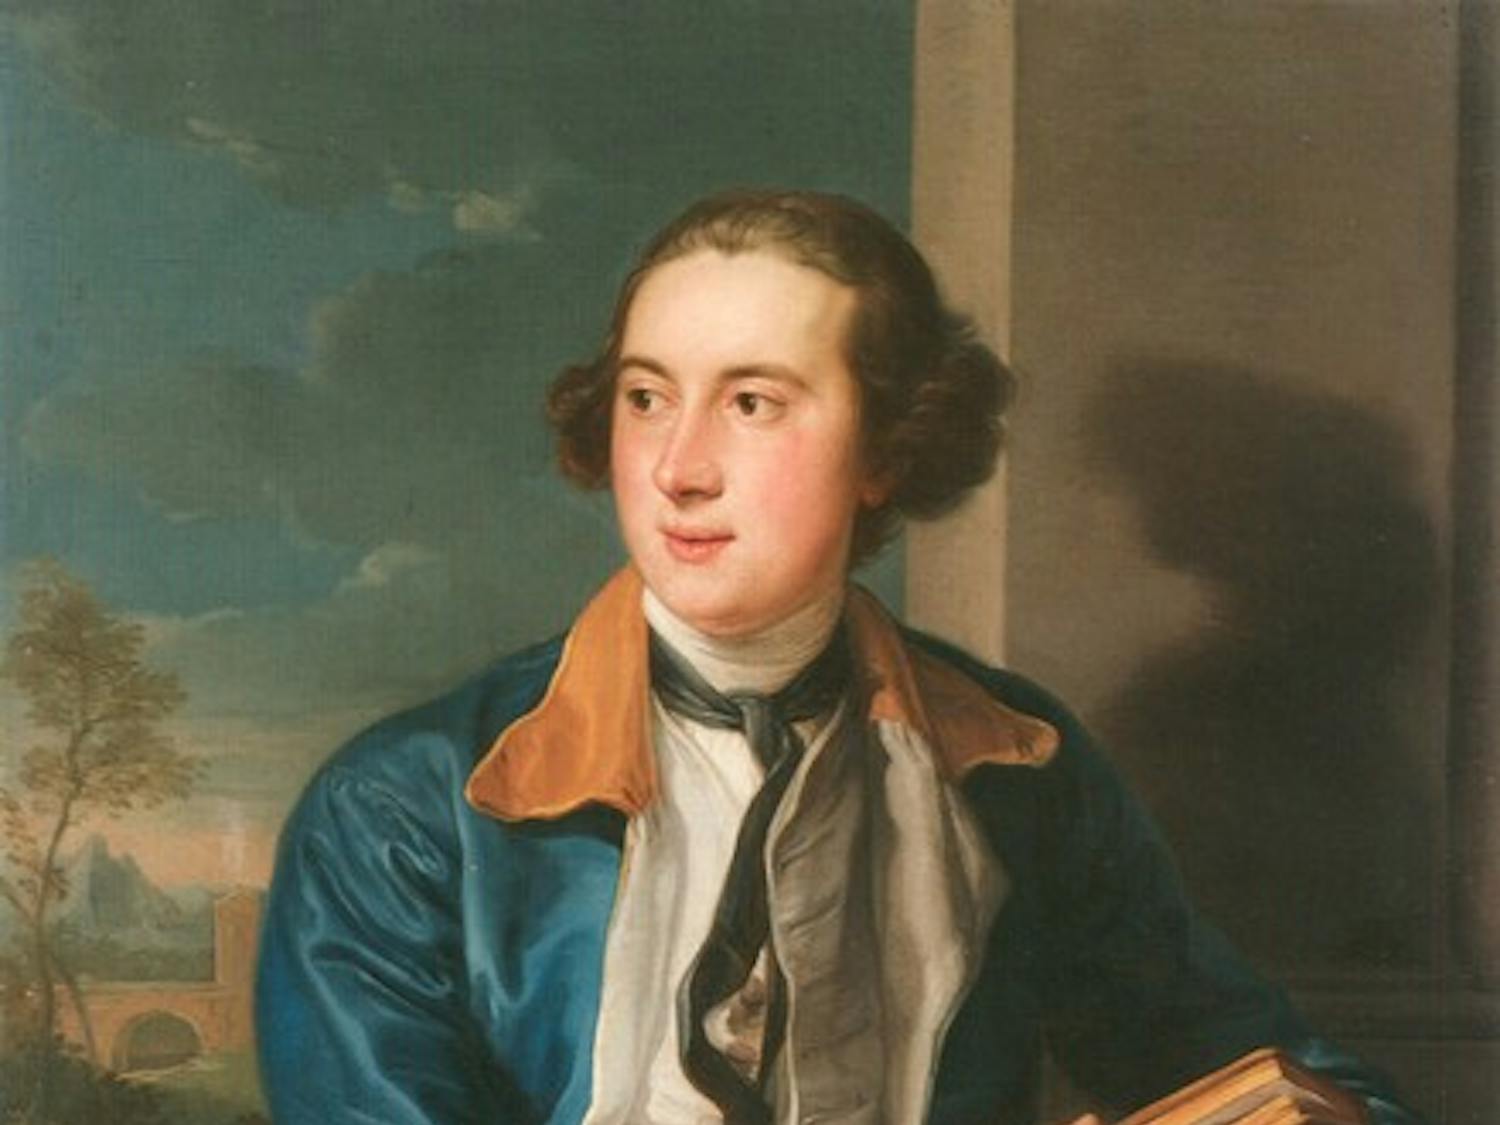 The Hood Museum purchased a 1756 portrait of the College's namesake, William Legge, the second Earl of Dartmouth, earlier this month.